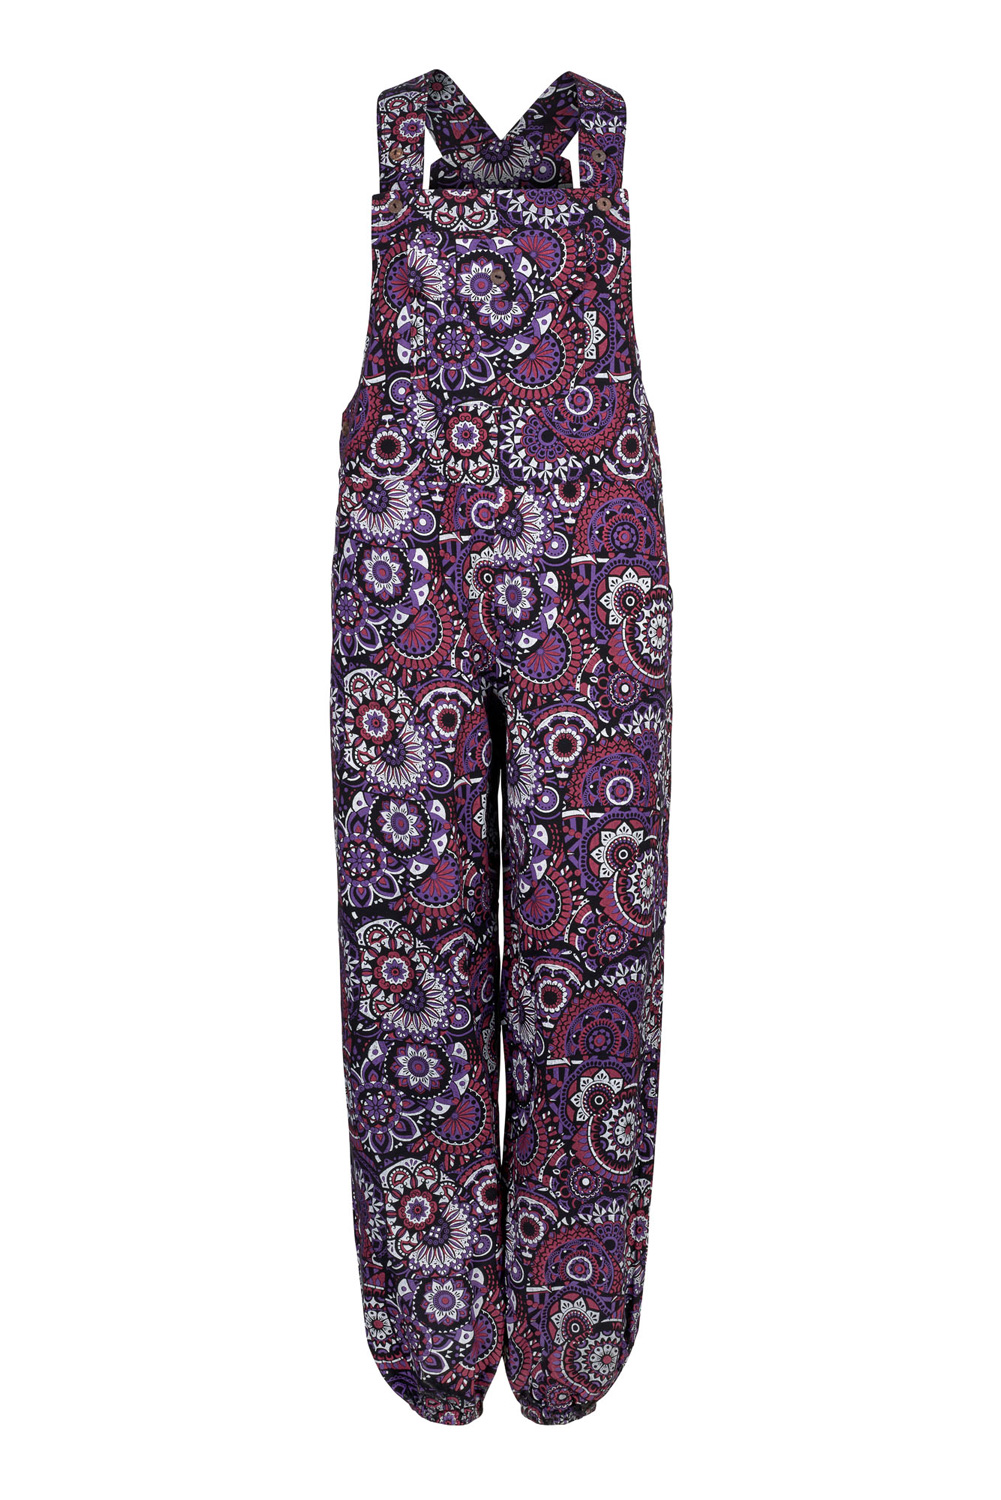 Wicked Dragon Clothing - Funky print baggy dungarees